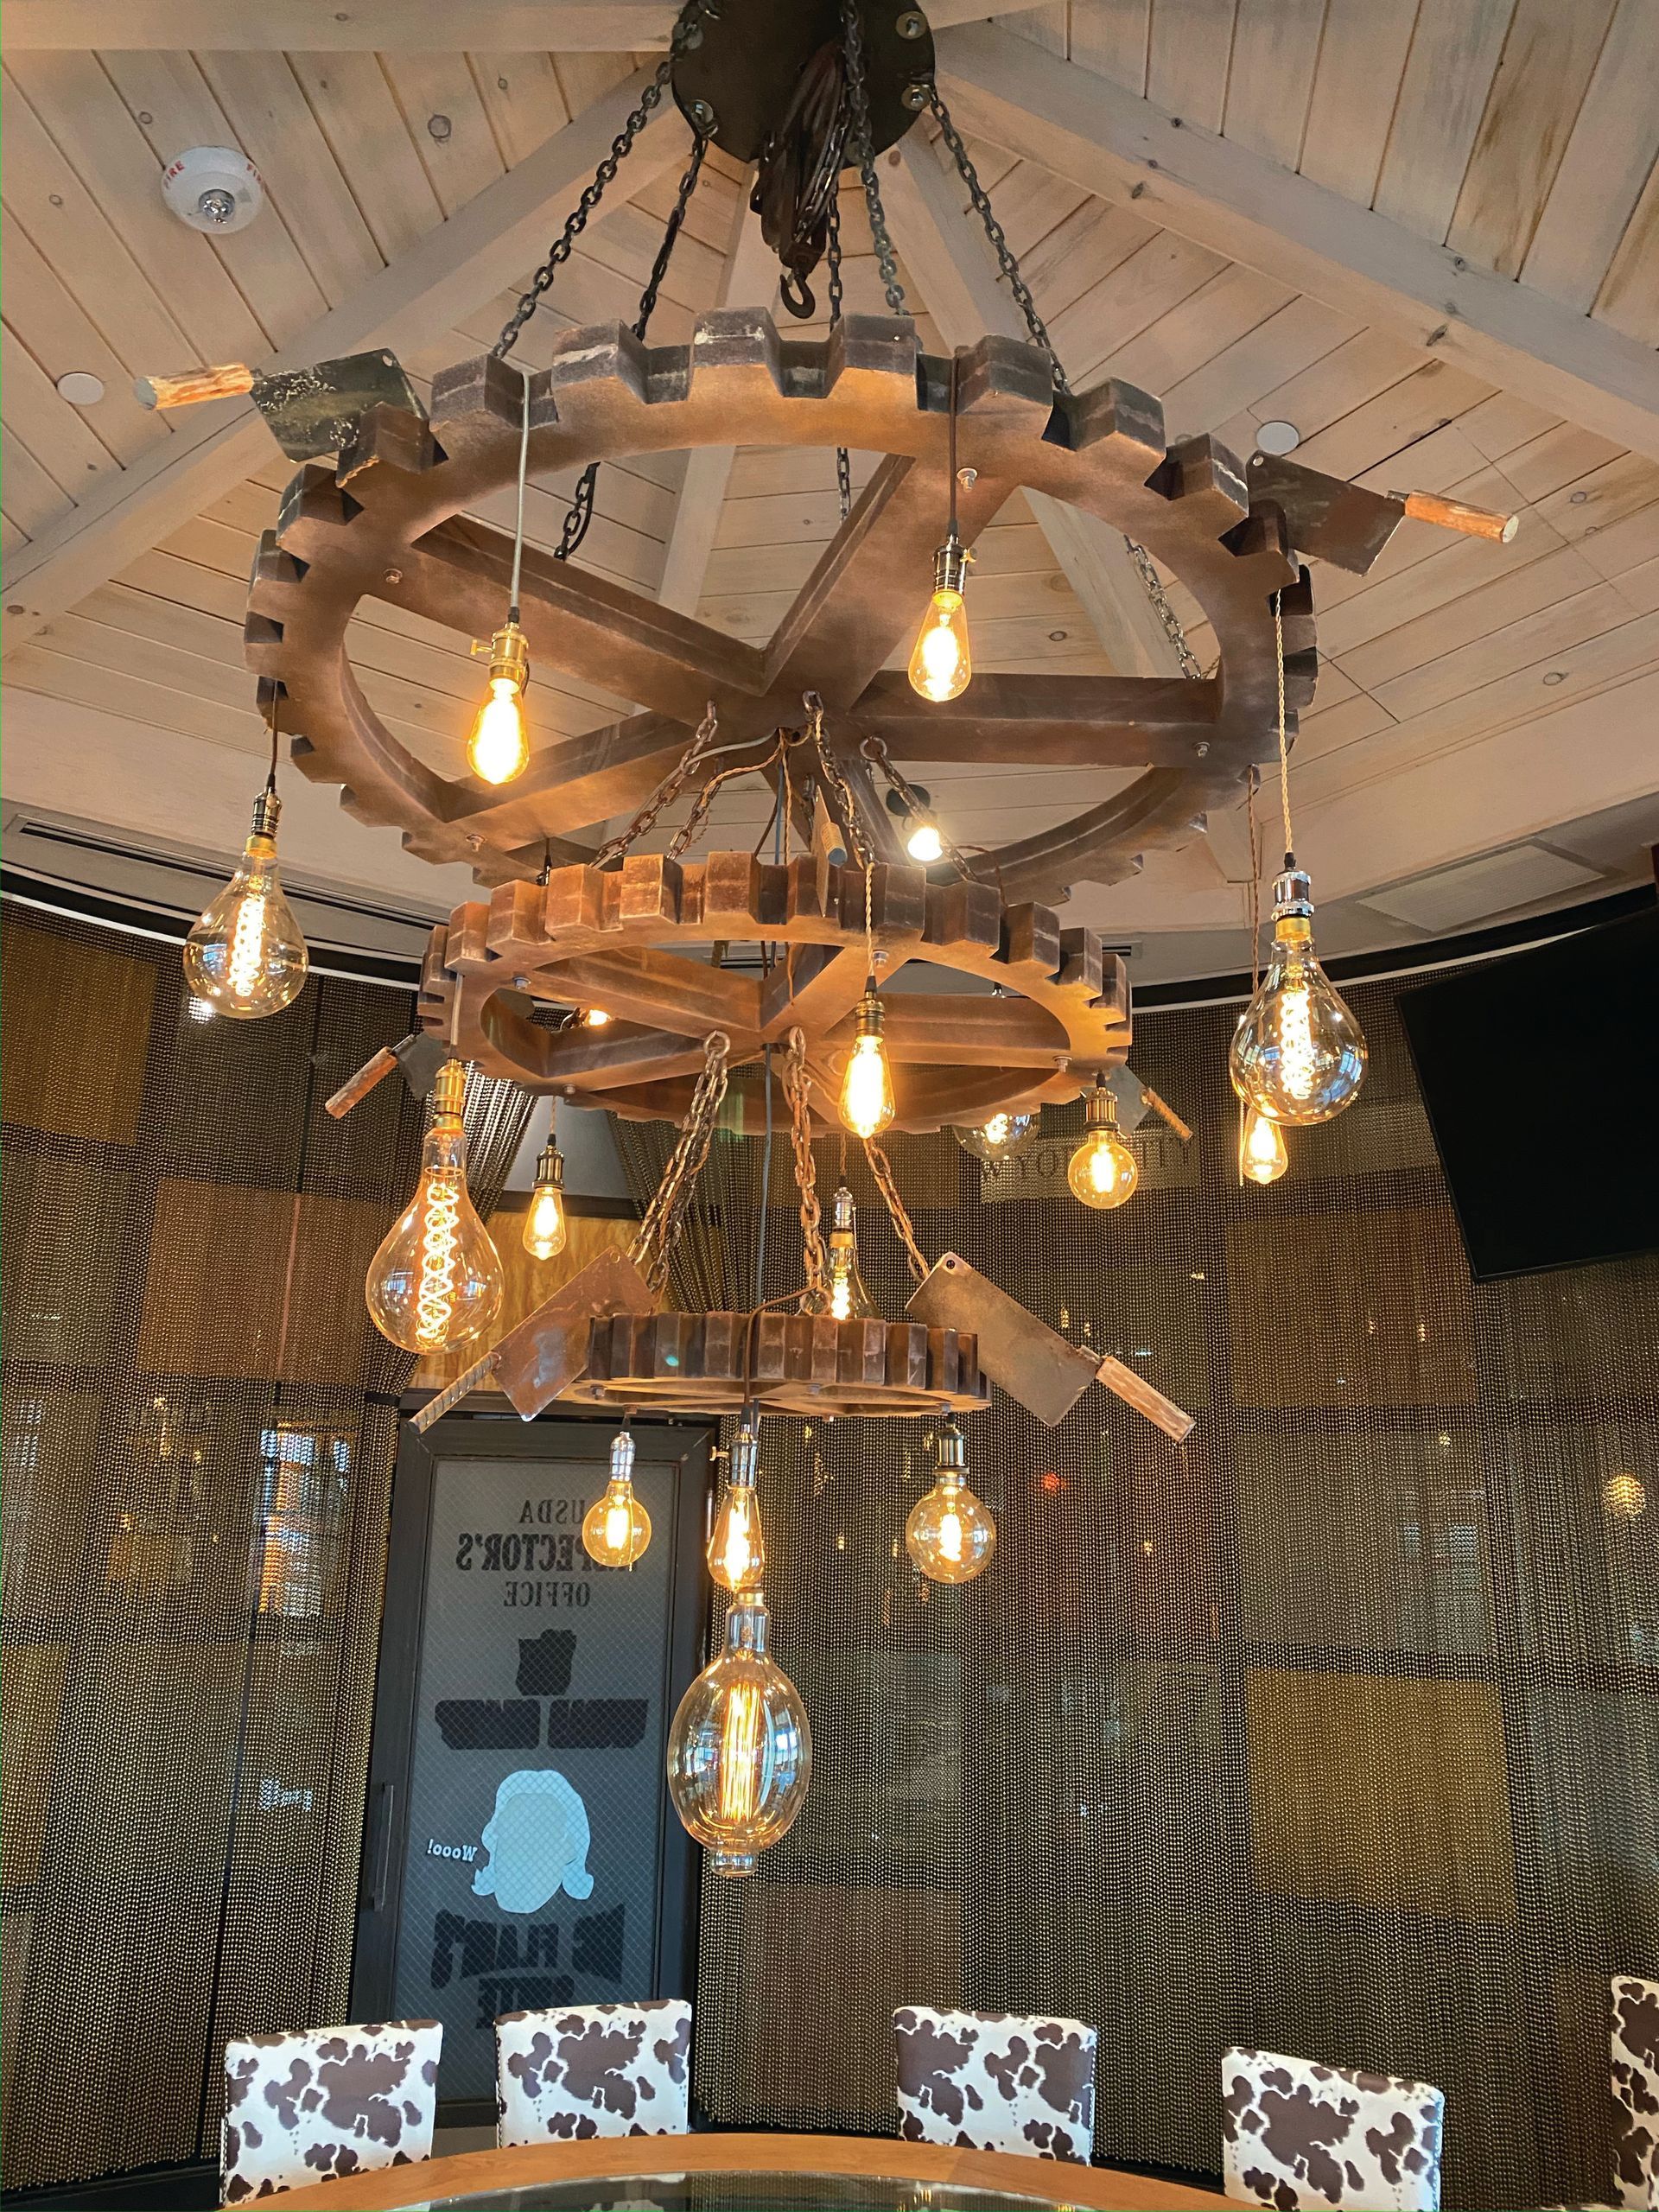 a large wooden chandelier hangs from the ceiling above a table